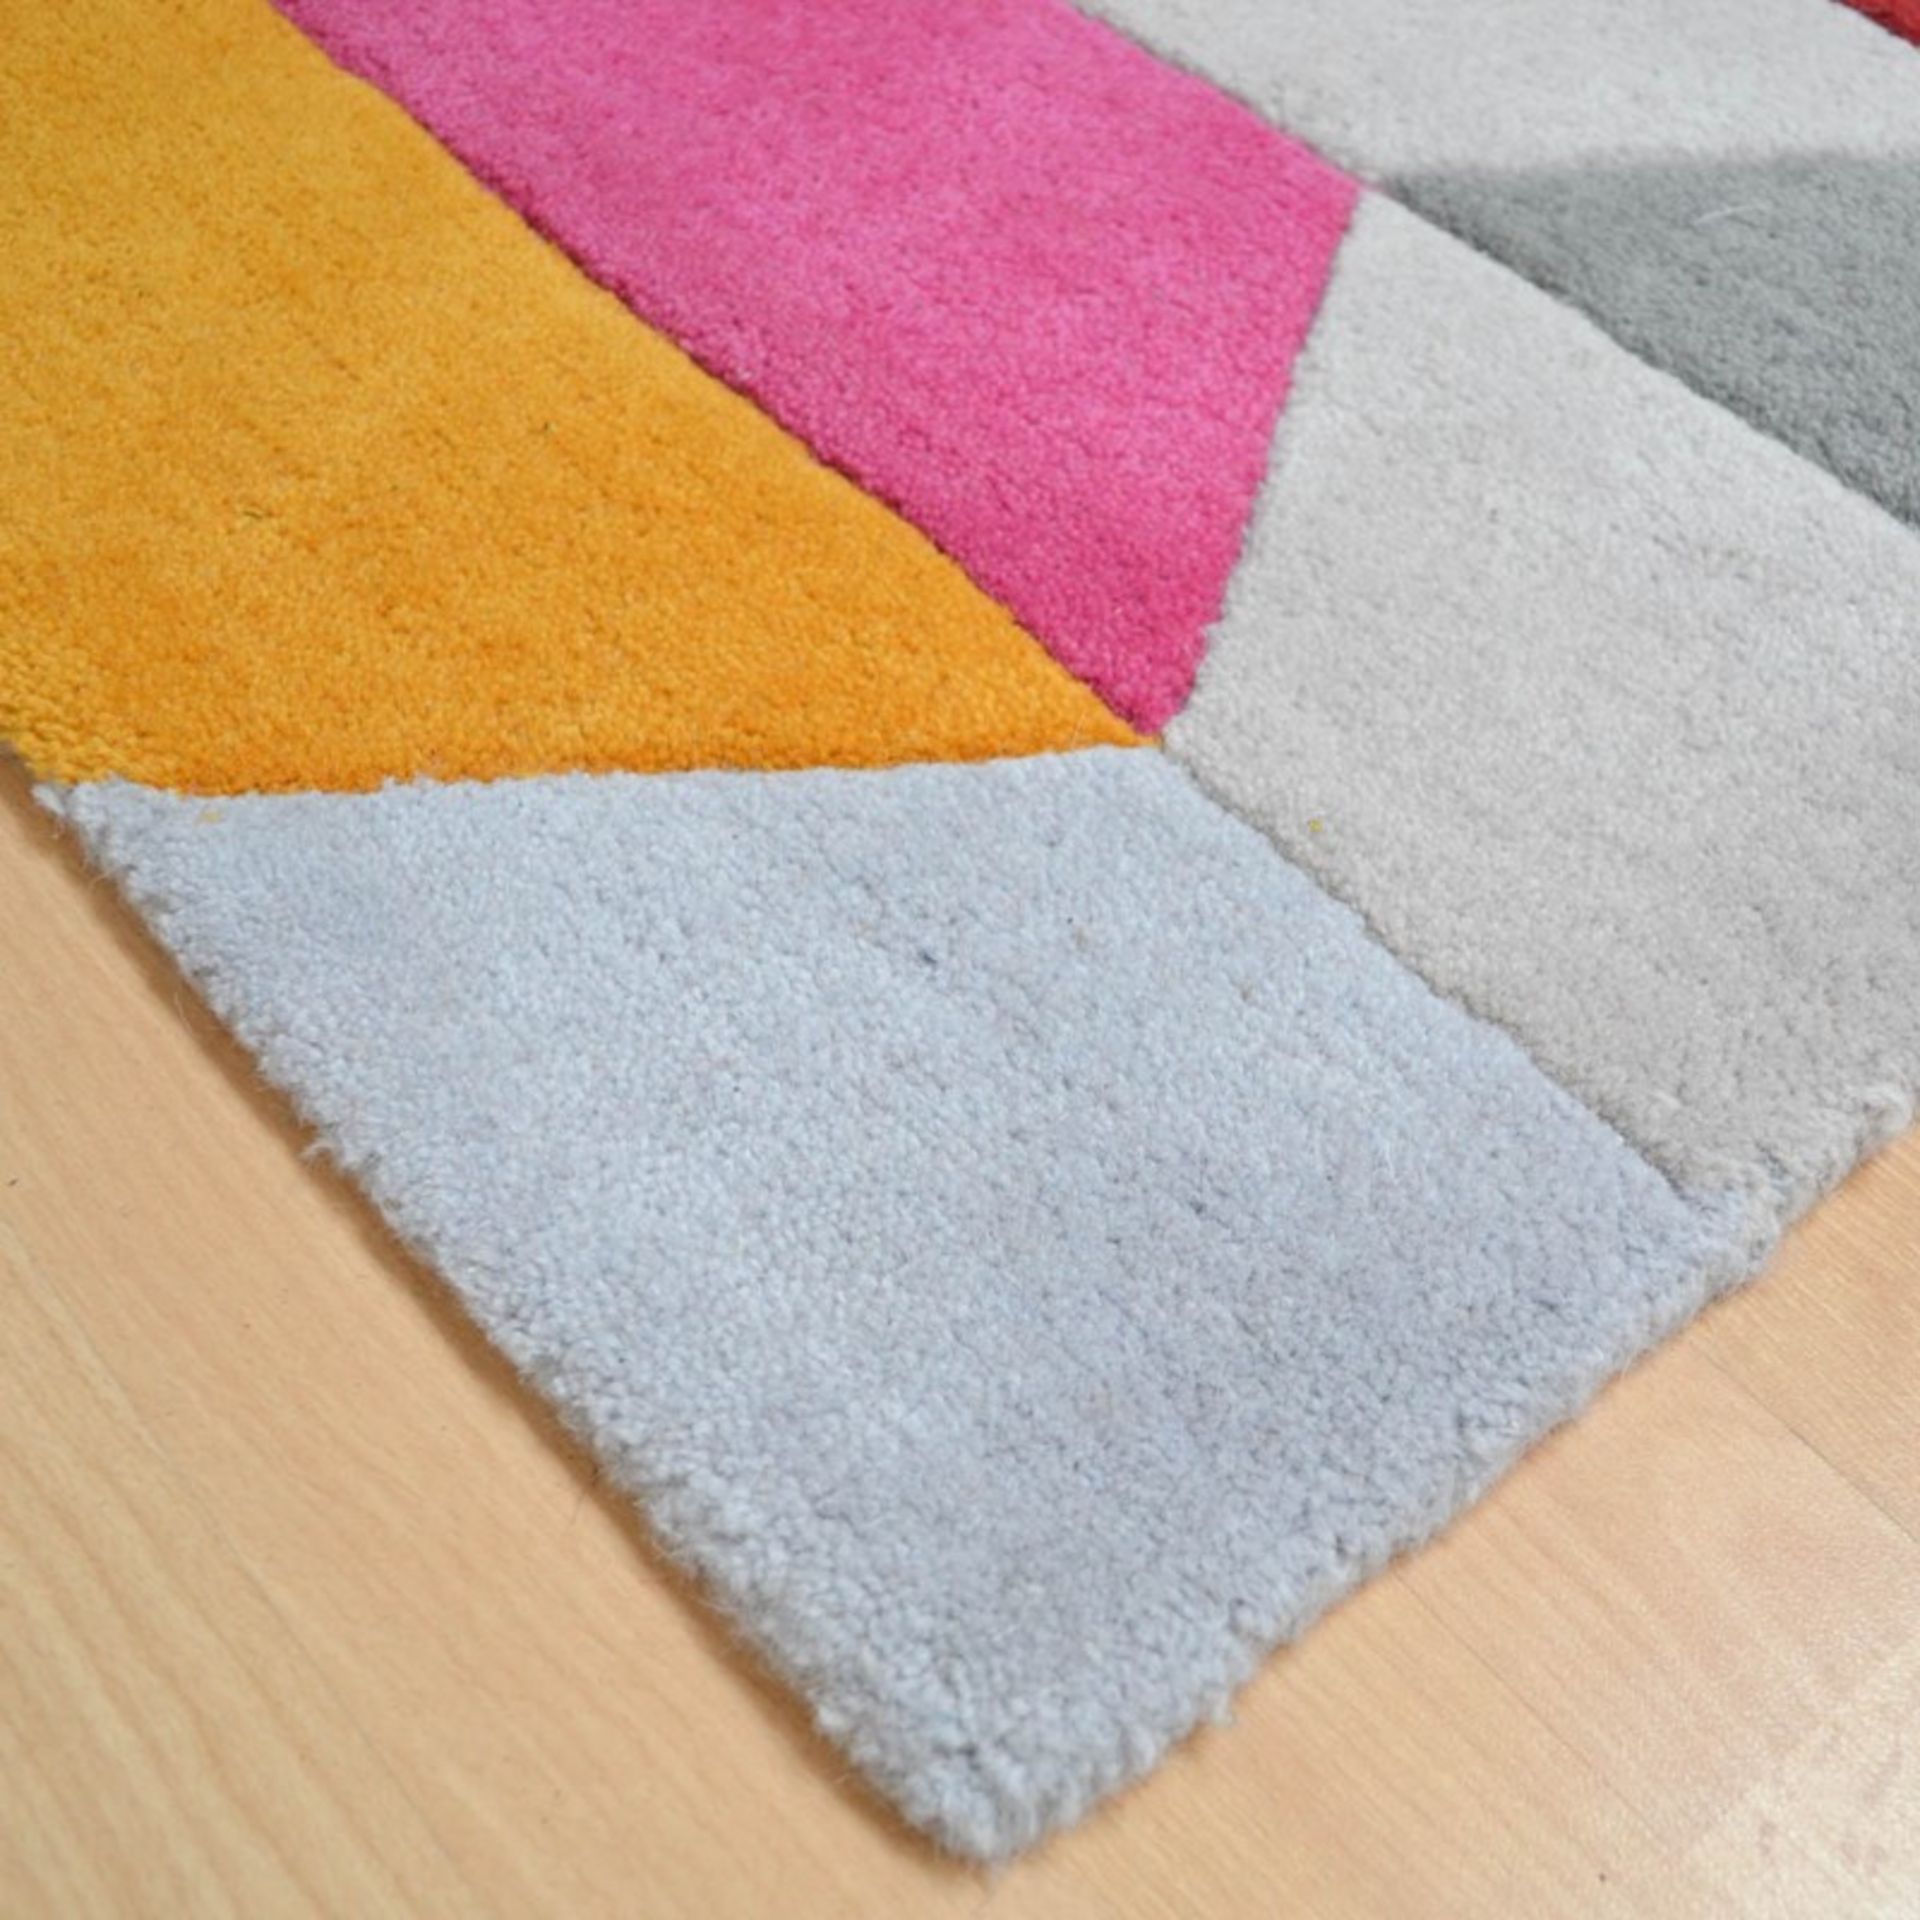 1 x Funk Honeycomb Bright Colourful Modern Hallway Runners - 100% New Zealand Wool - Handmade In - Image 2 of 6